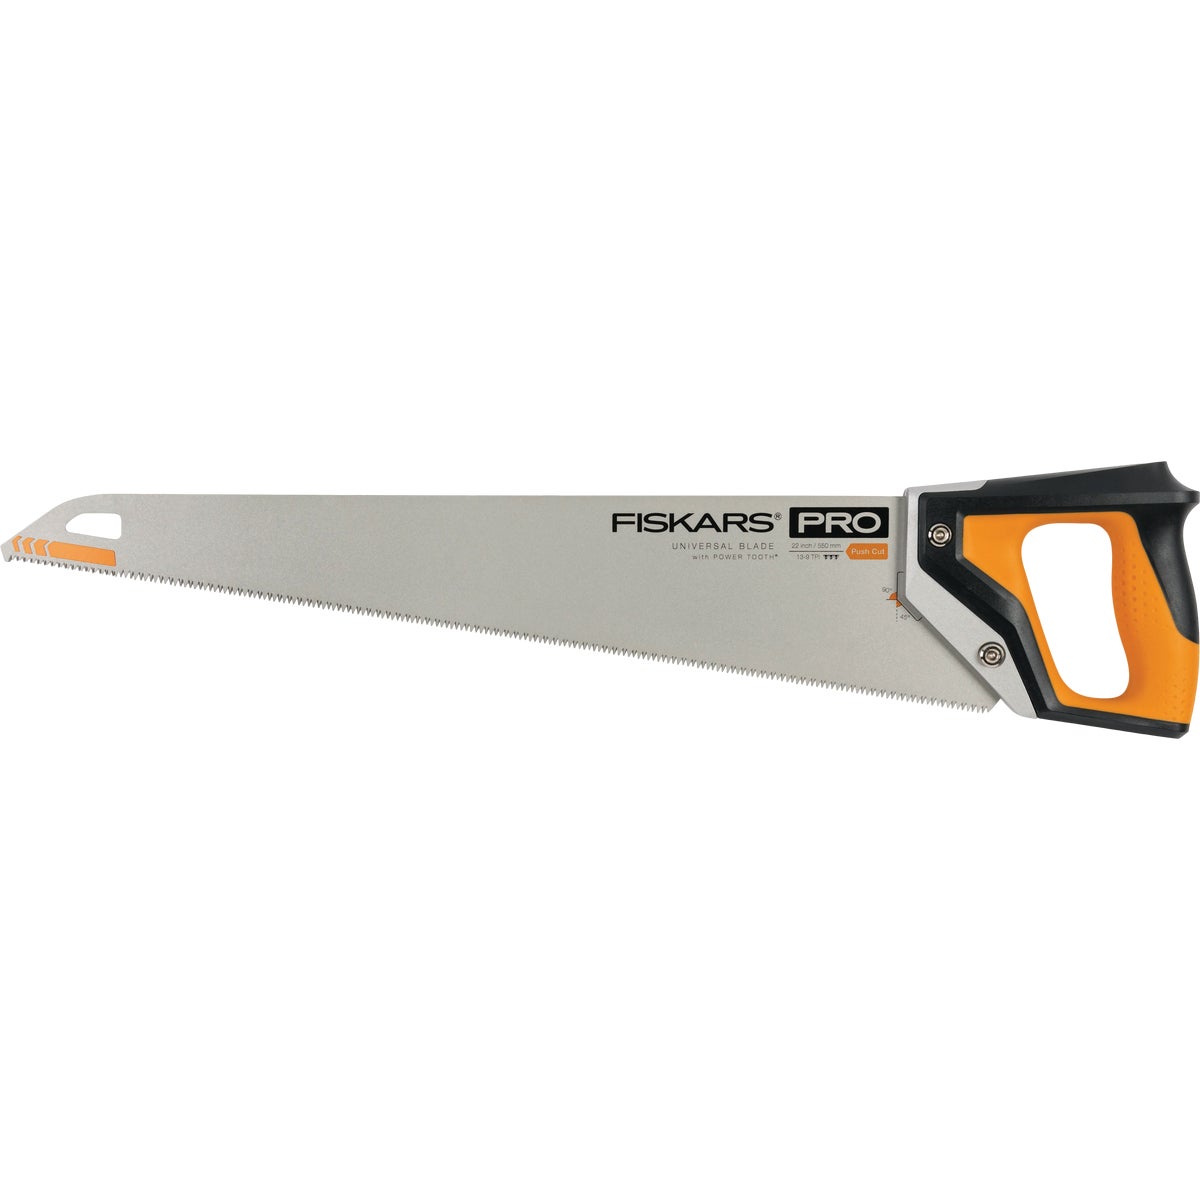 Fiskars Pro POWER TOOTH 22 In. L Blade Metal Handle Hand Saw with Sheath